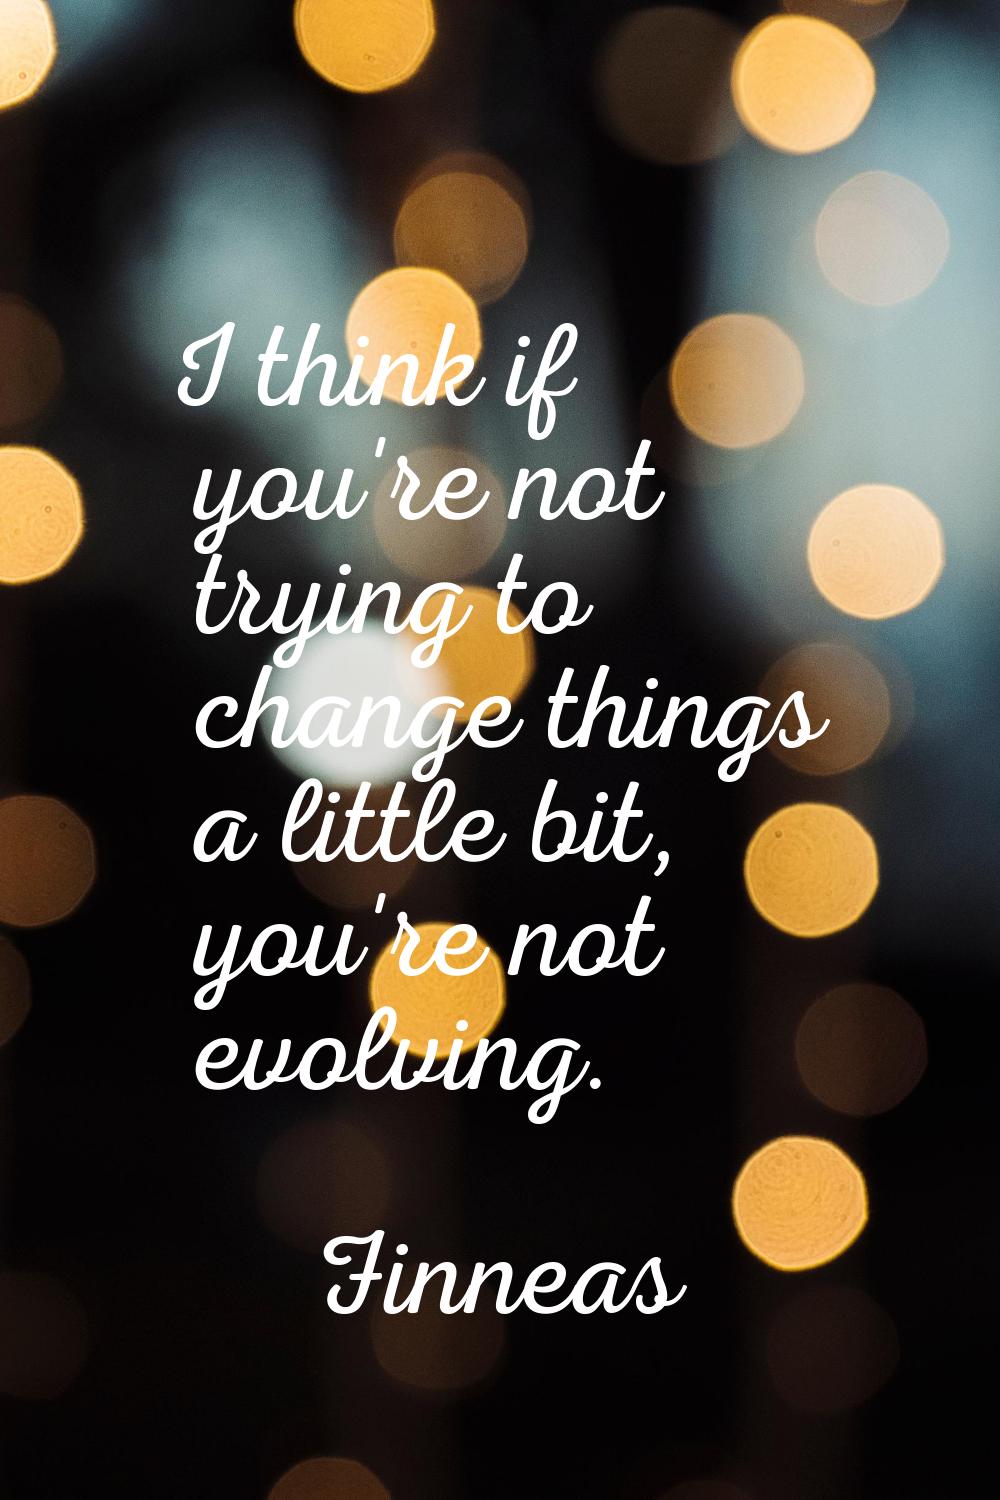 I think if you're not trying to change things a little bit, you're not evolving.